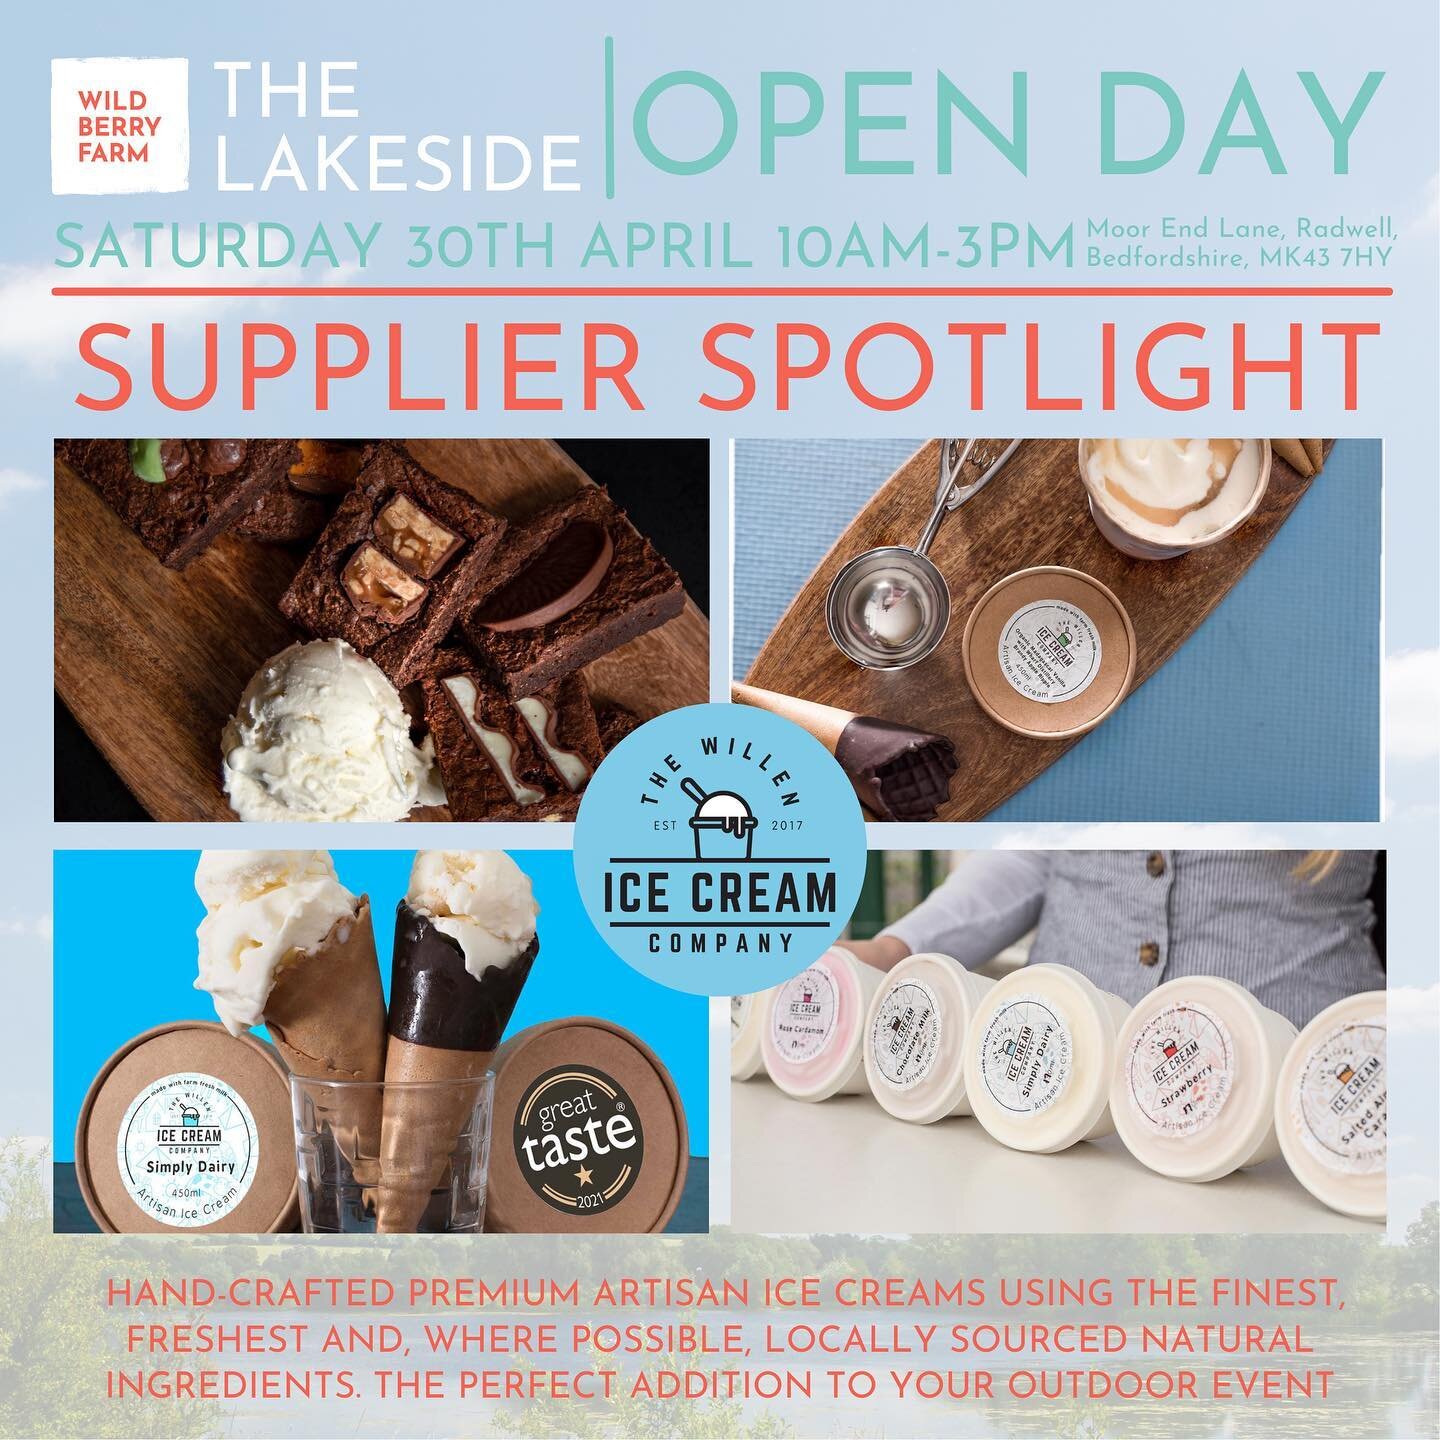 Supplier Spotlight | We challenge you to think of a better addition to your Spring or Summer wedding than delicious hand crafted artisan ice cream 🍦

@icewillen Are a family run small-batch ice cream team who aim to delight and impress your guests w